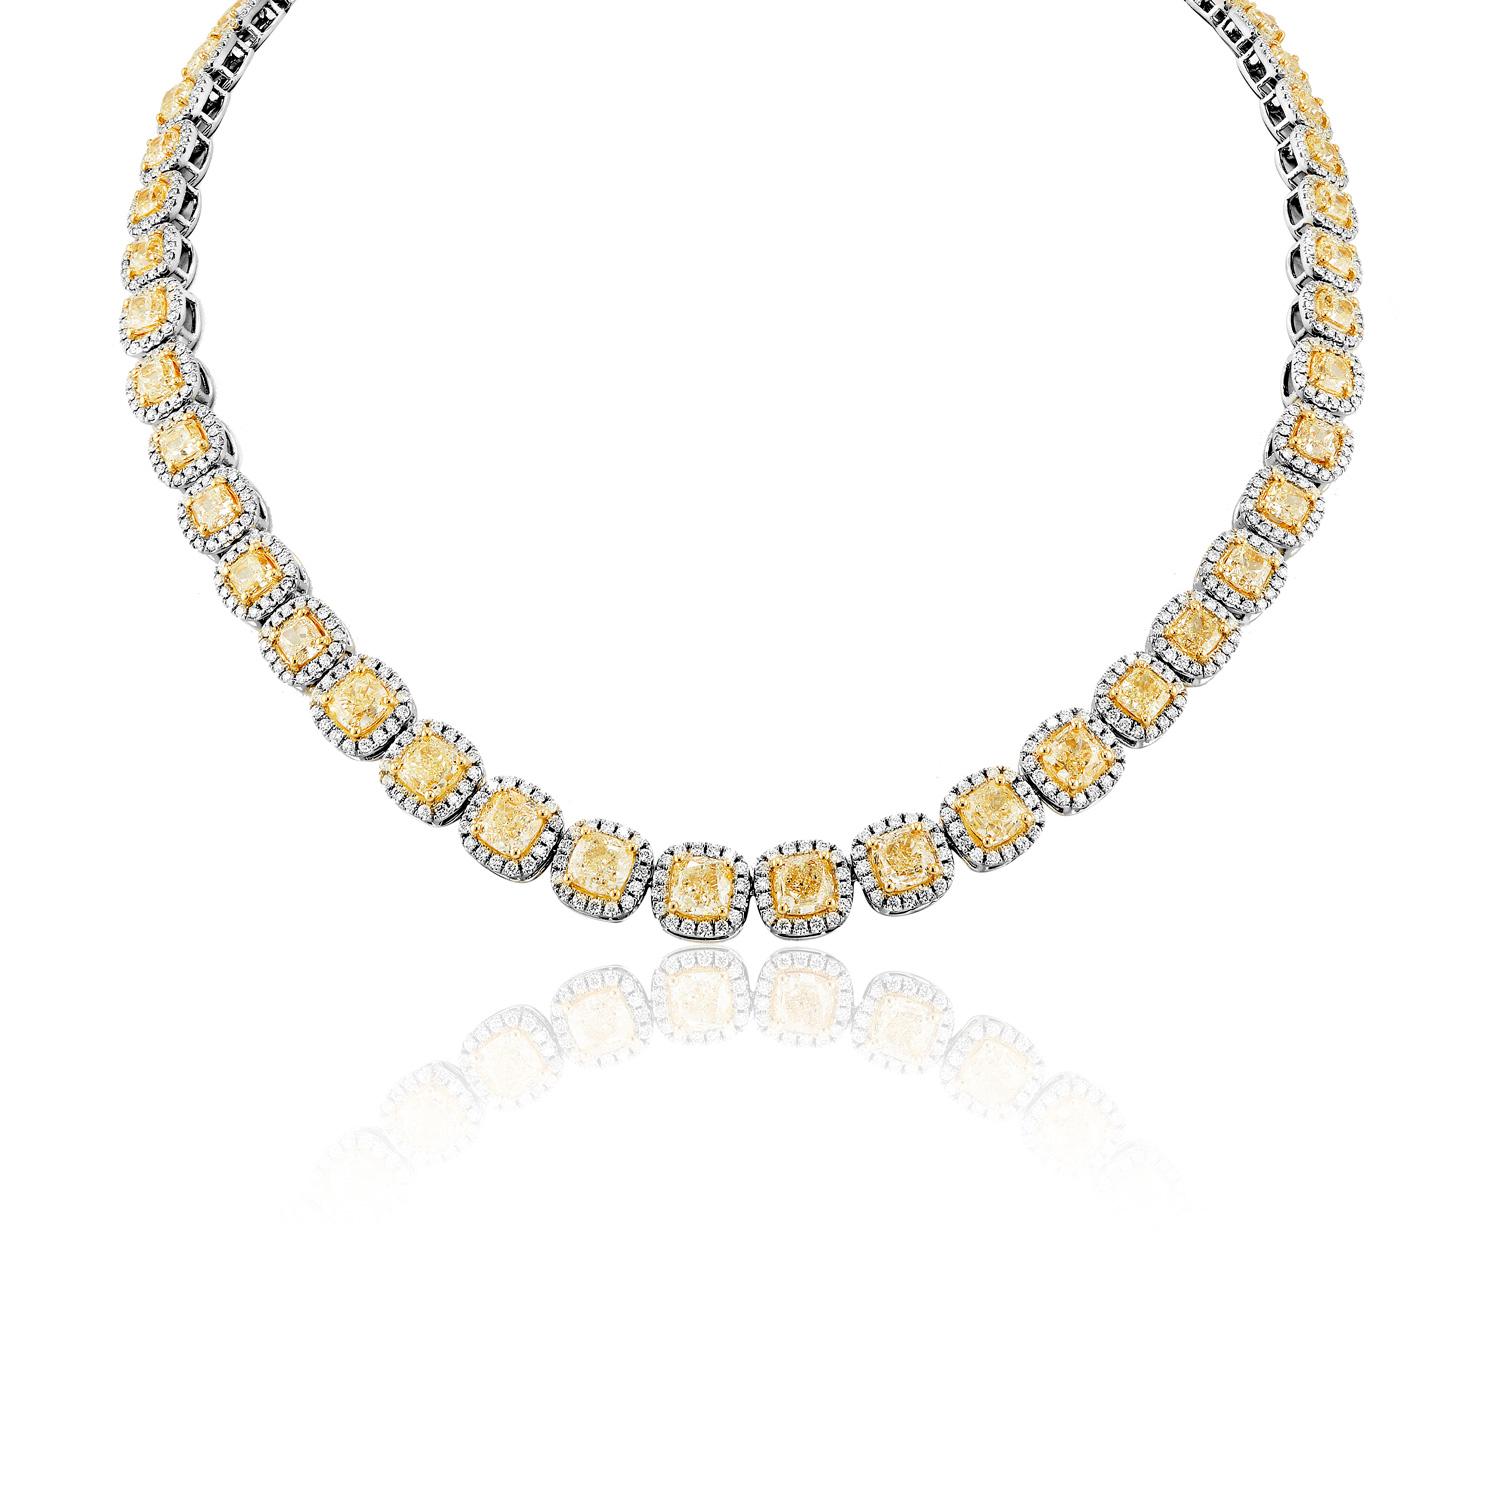 Earth Mined Diamonds:

Carat Weight: 38.52 Carats
Style: Cushion Cut

Halo Diamonds:
Carat Weight: 11.00 Carats
Style: Round Brilliant Cut 
Chains: 18 Karat White and Yellow Gold

Total Carat Weight: 49.52 Carats